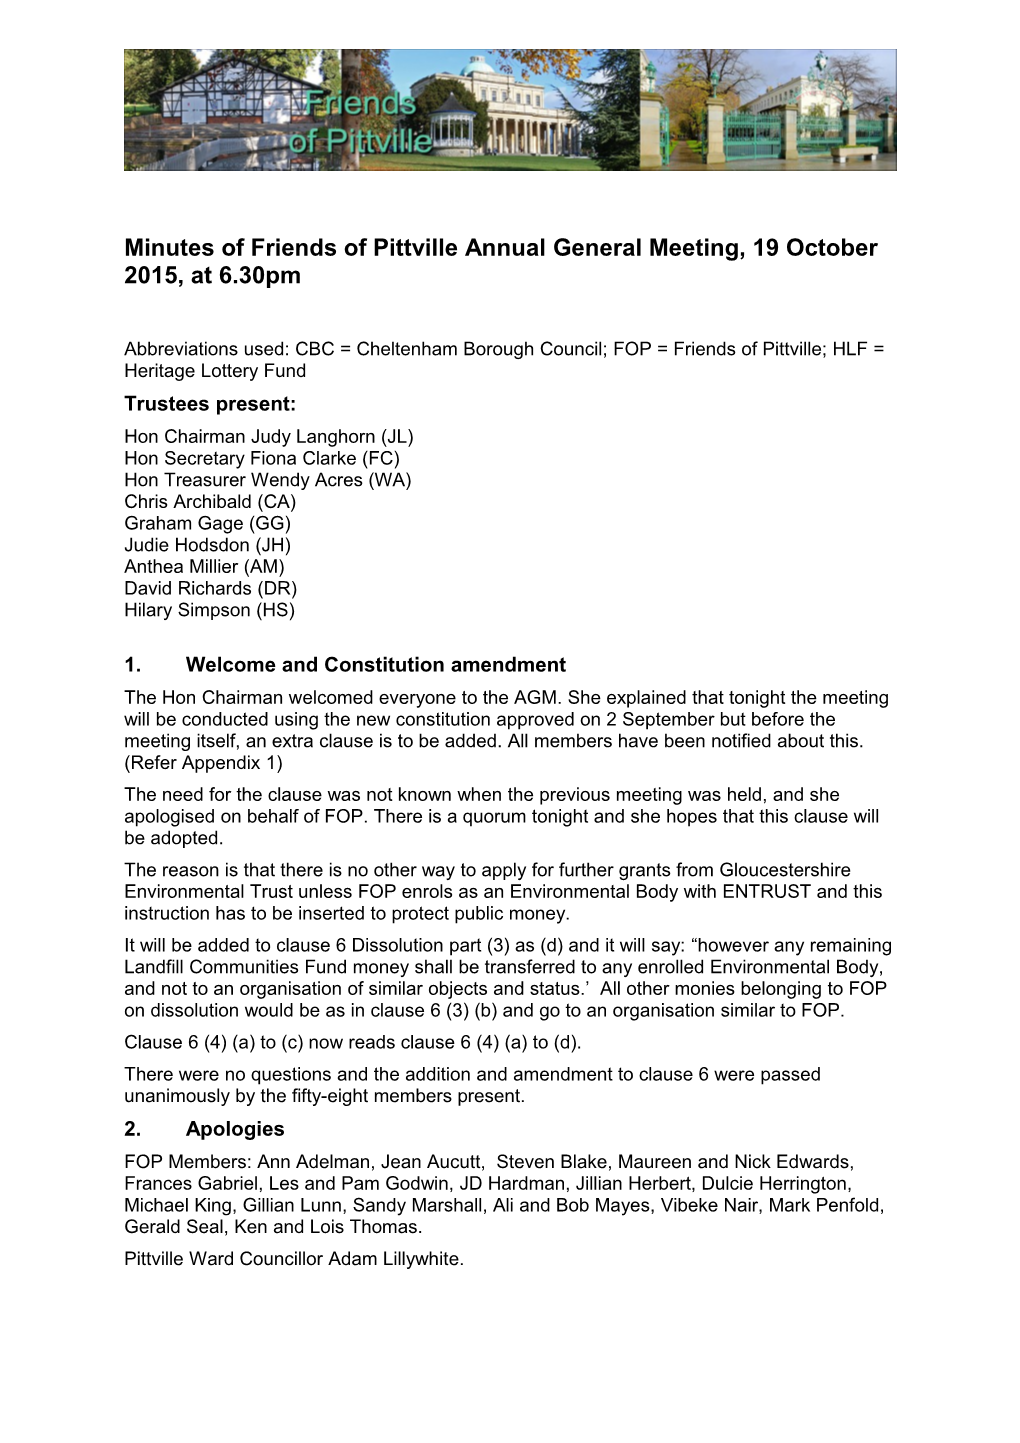 Minutes of Friends of Pittville Annual General Meeting, 19 October 2015, at 6.30Pm